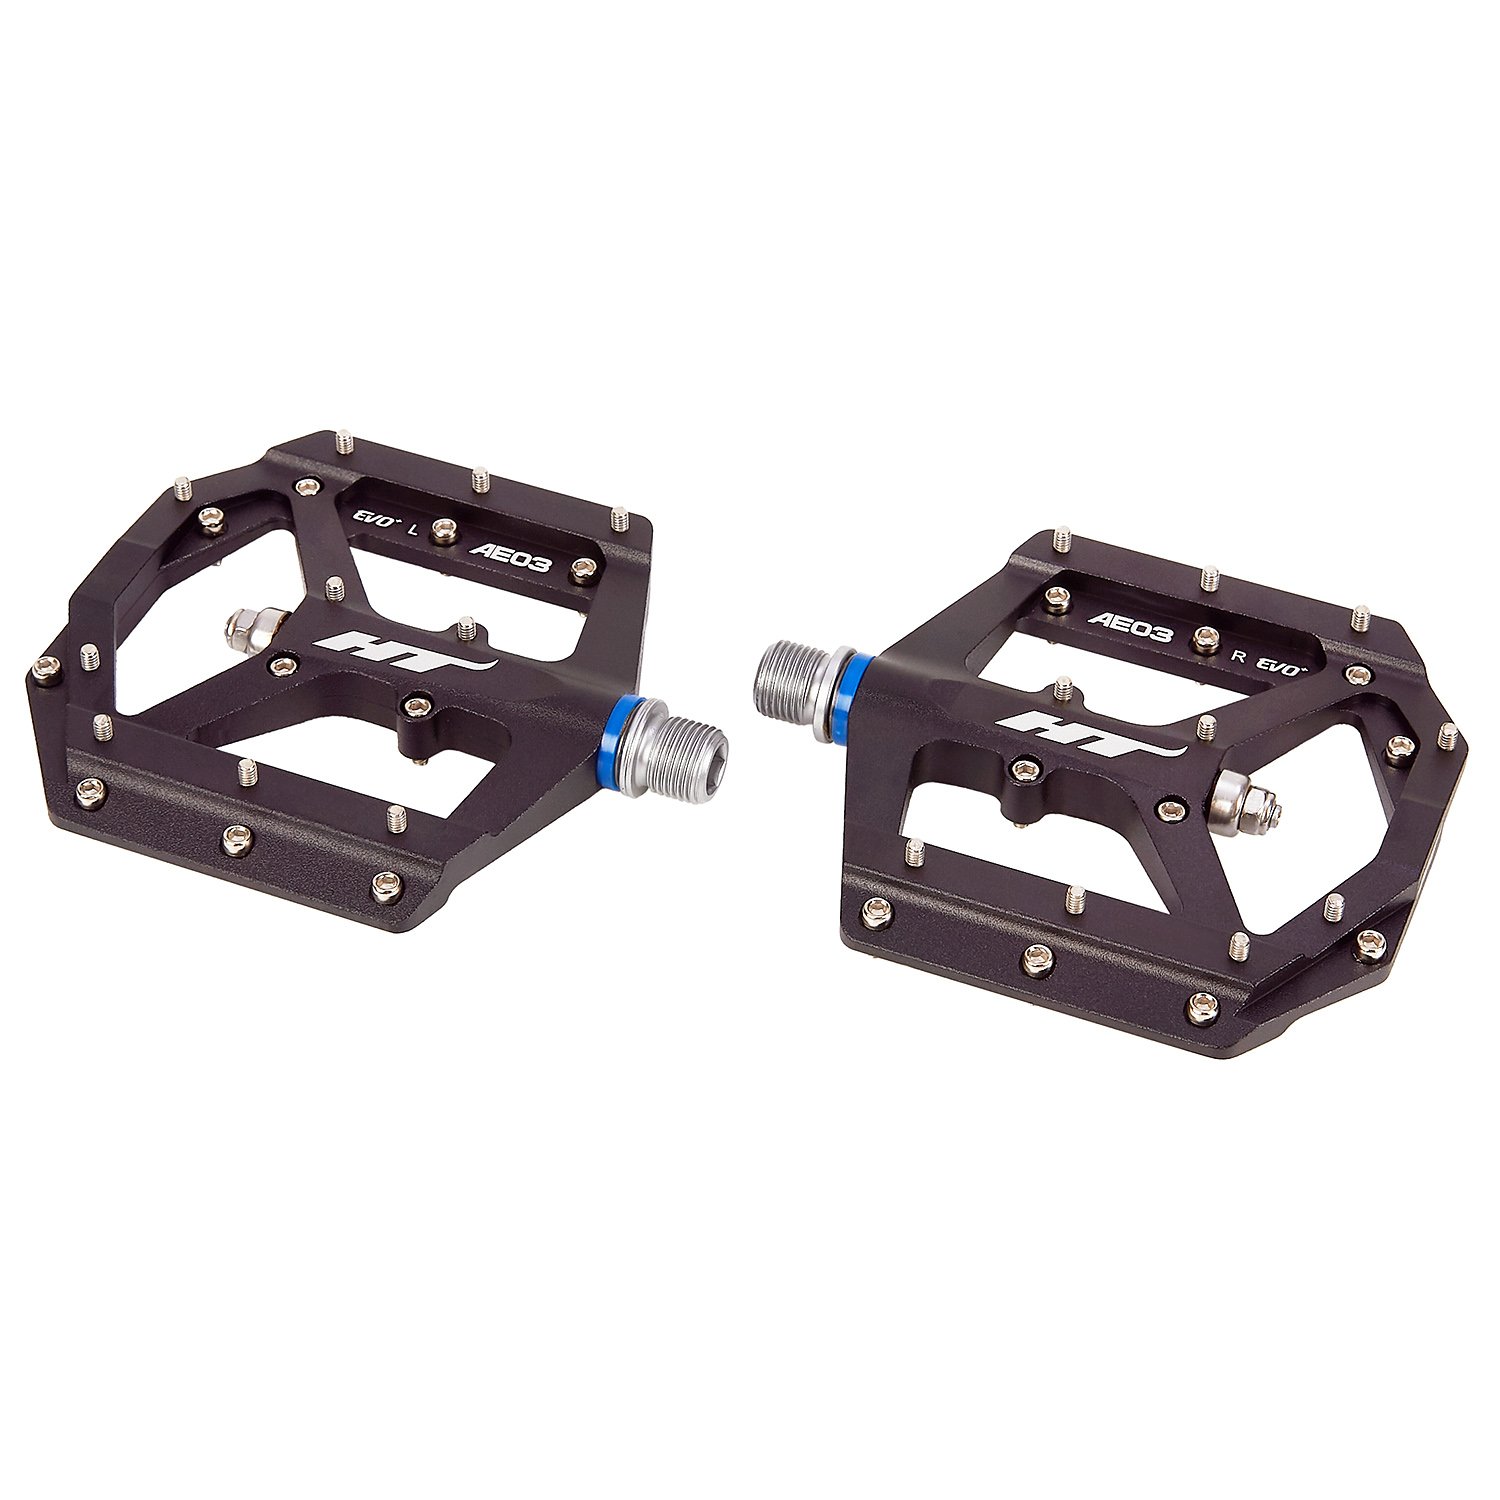 HT Components Pedals AE03 Black